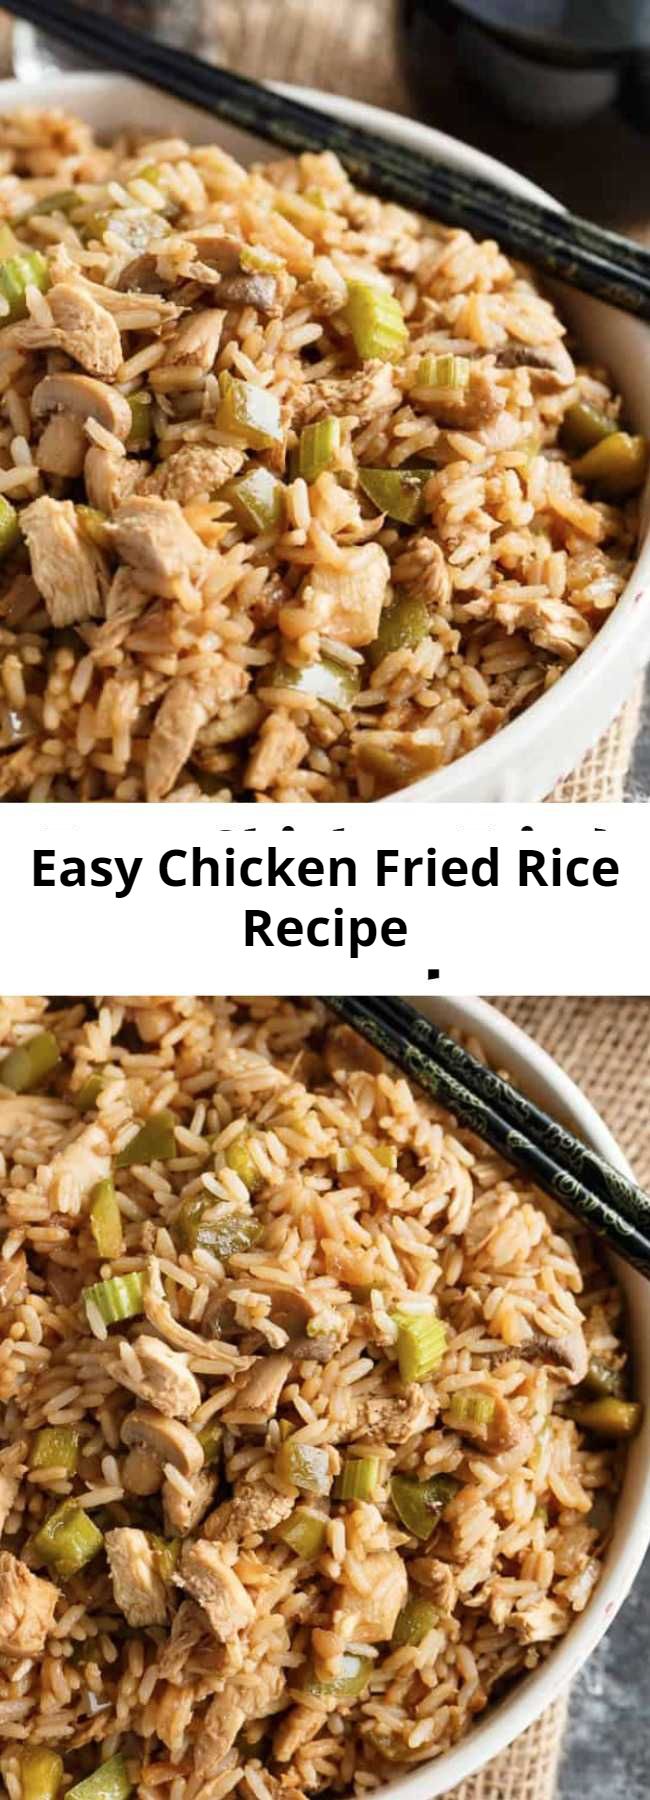 Easy Chicken Fried Rice Recipe - Skip takeout and make homemade Chicken Fried Rice! Tender rice that is loaded with veggies, spices, and, of course, pieces of chicken in every bite. A must-make rice recipe. This is a recipe that the entire family would enjoy AND it’s easy (and inexpensive) to make. You can make it last for an extra day or two with leftovers!